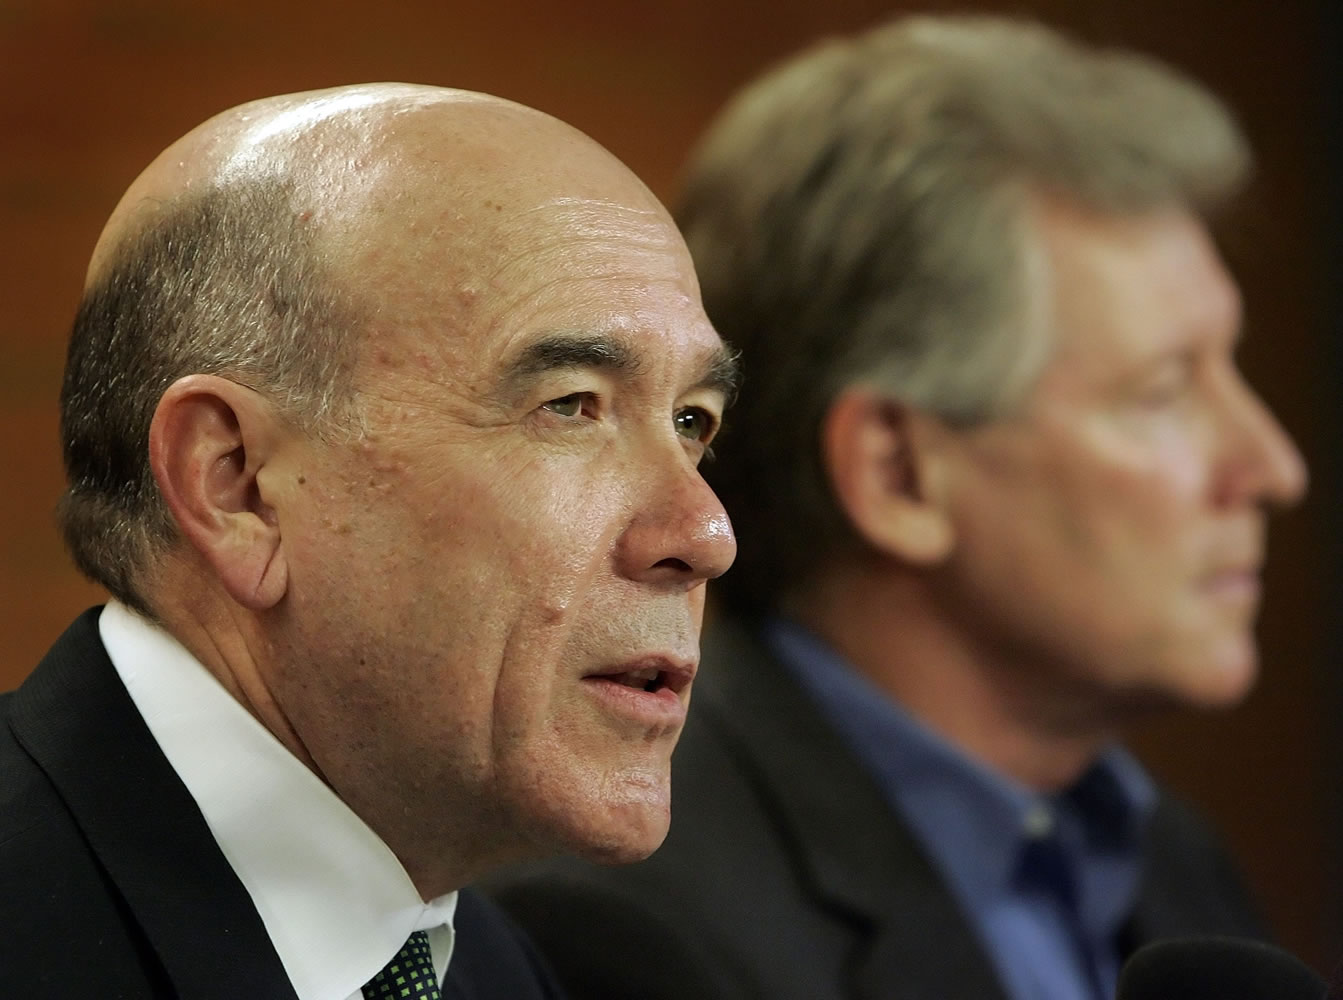 University of Oregon President Richard Lariviere, left, discusses the $2.3 golden parachute for former athletic director Mike Bellotti, right, during a news conference April 6, 2010 in Eugene, Ore.